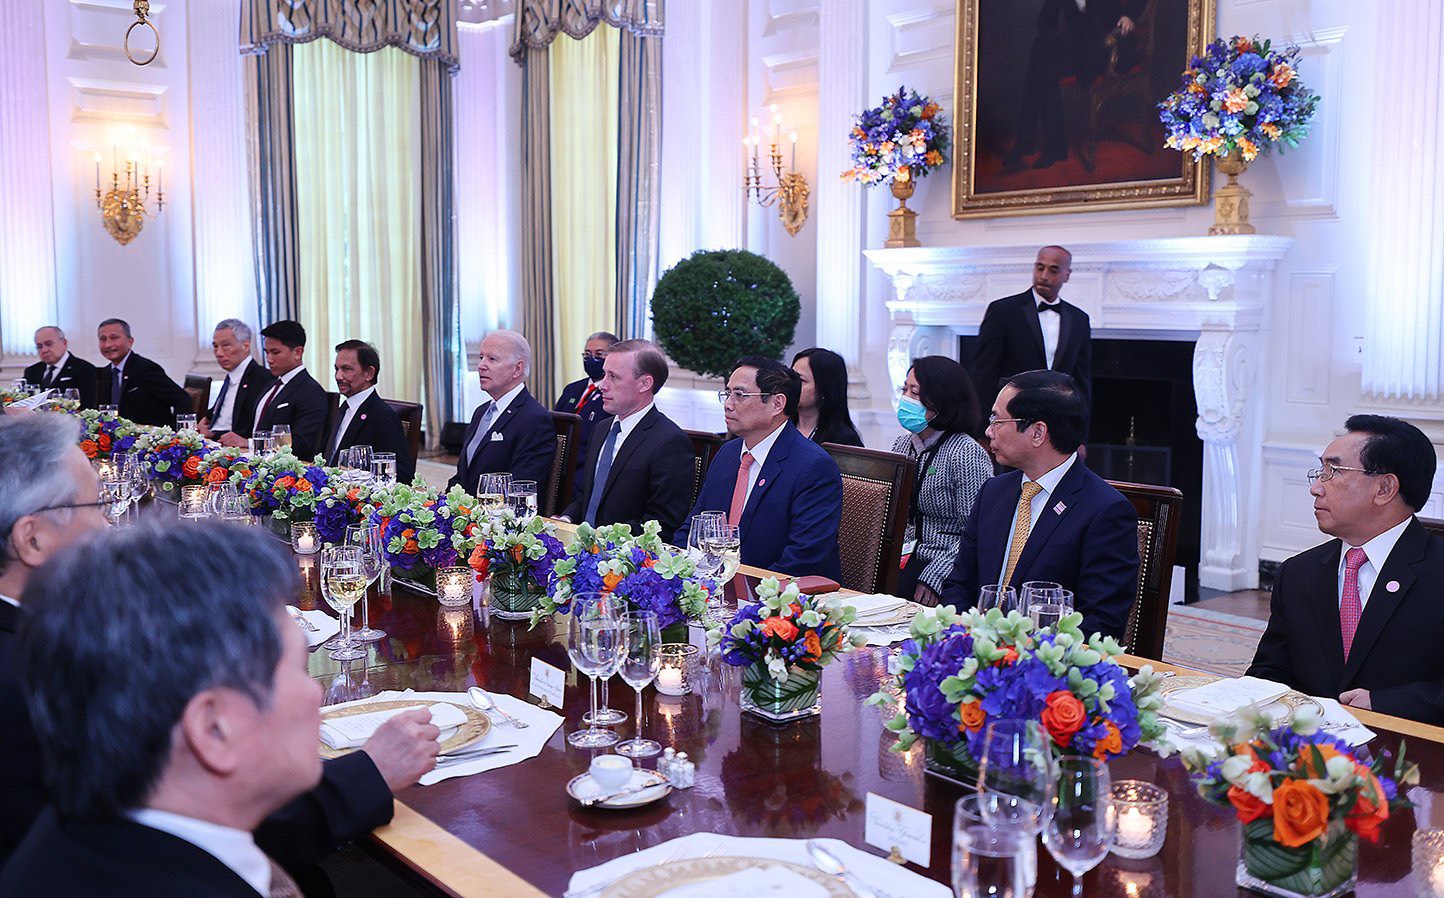 Leaders of ASEAN member countries attend a reception hosted by U.S. President Joe Biden in Washington, D.C., May 12, 2022. Photo: Duong Giang / Tuoi Tre